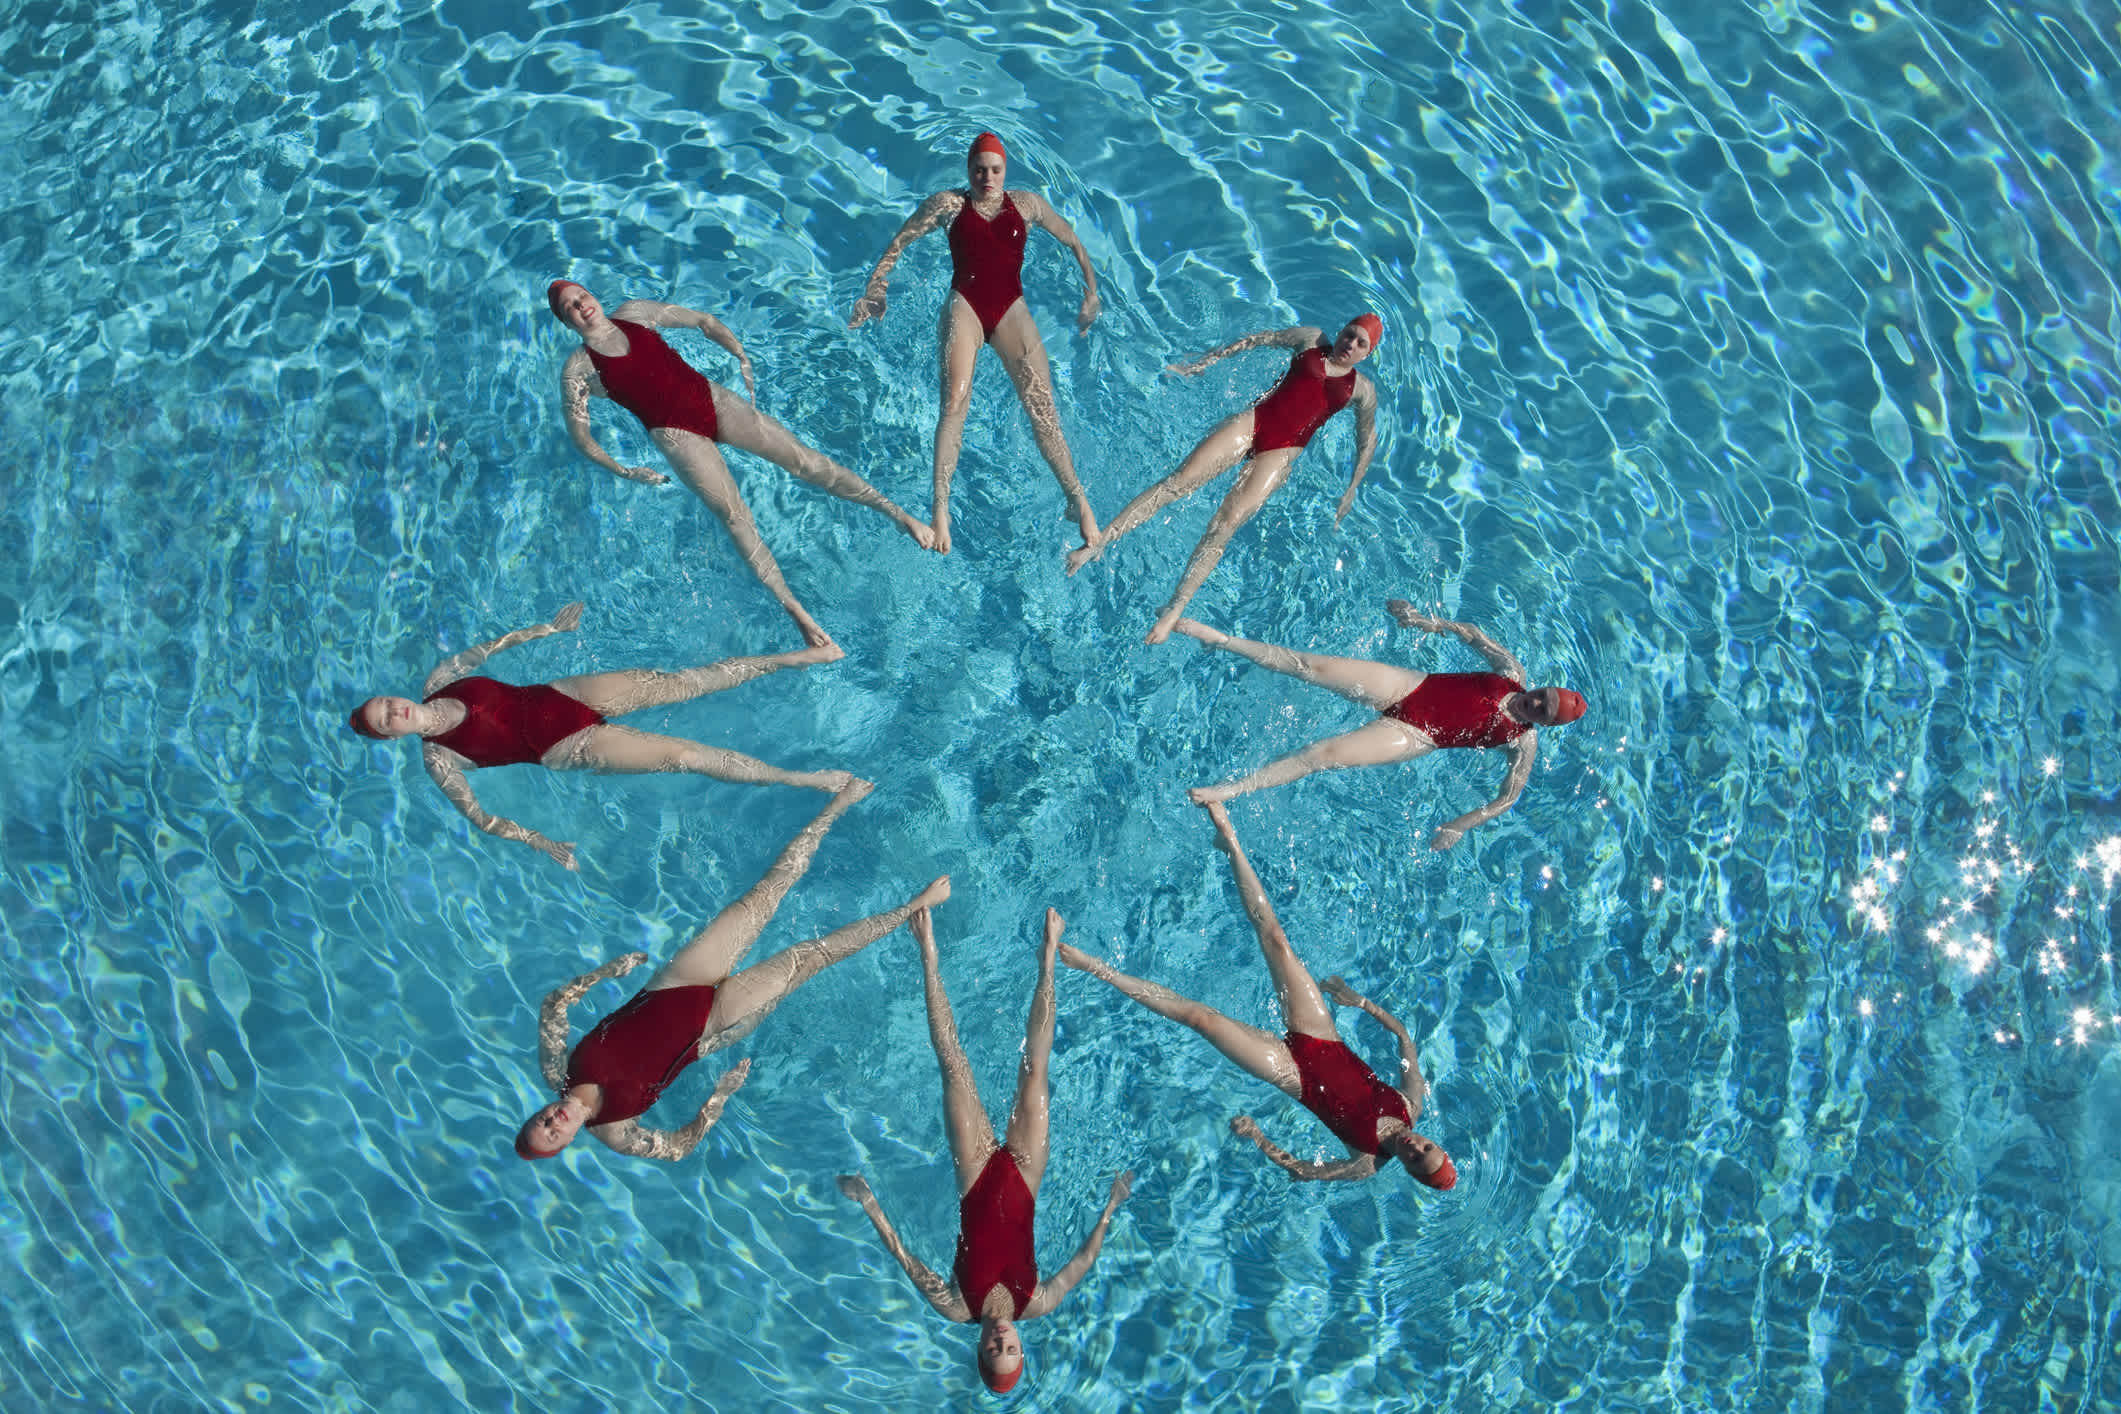 synchronized swimmer marketing goals and budget alignment